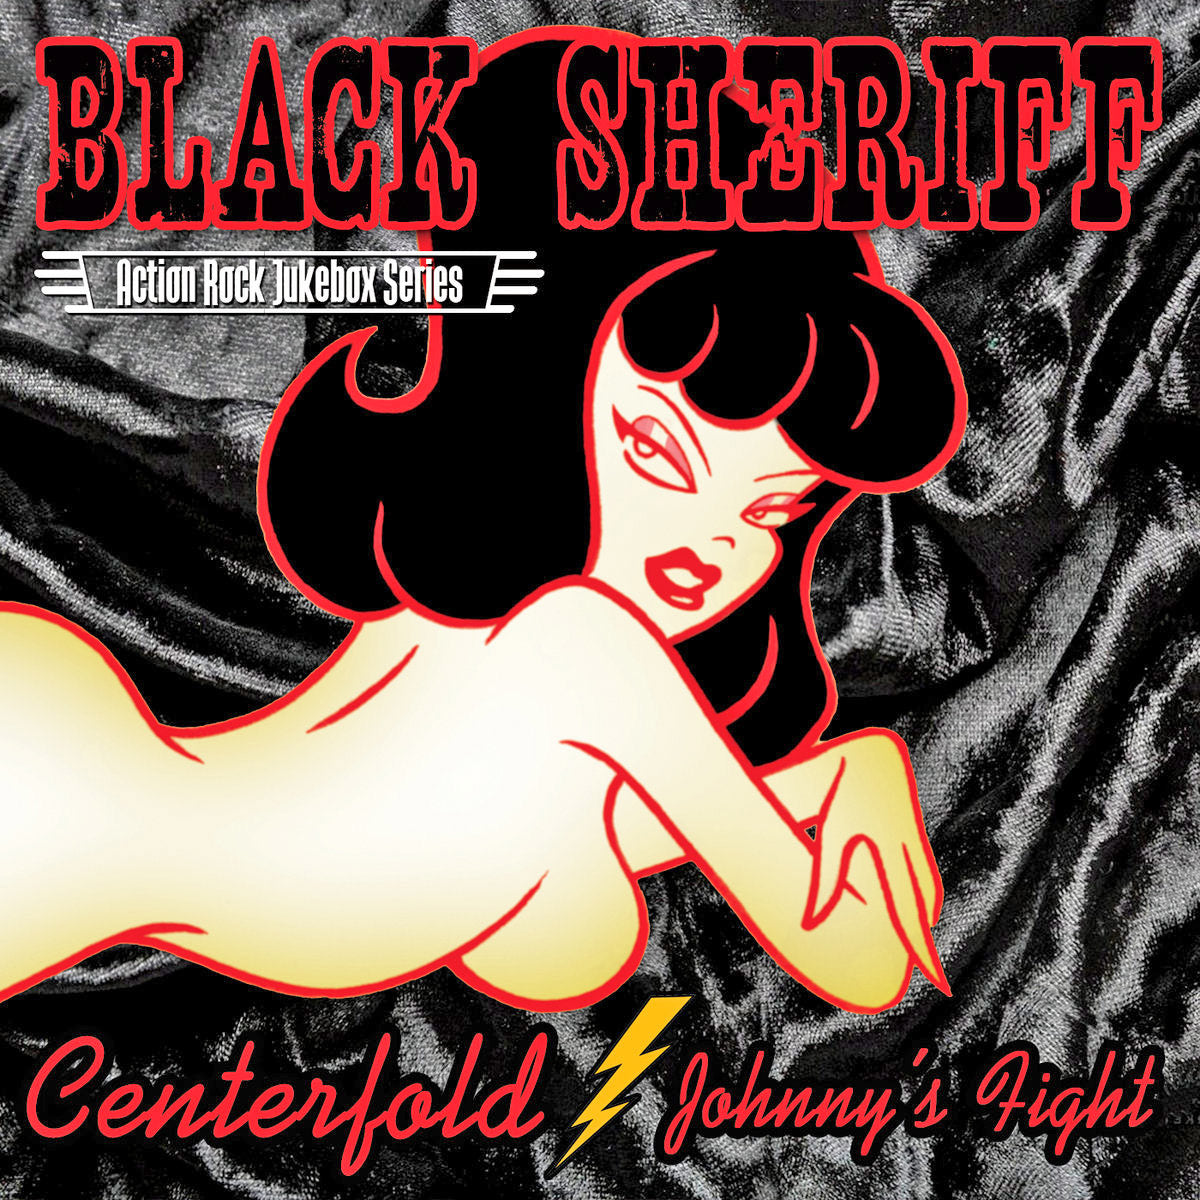 Black Sheriff - Centerfold 7" ~BITCH QUEENS / WITH JUKEBOX LABEL + 45 ADAPTER!